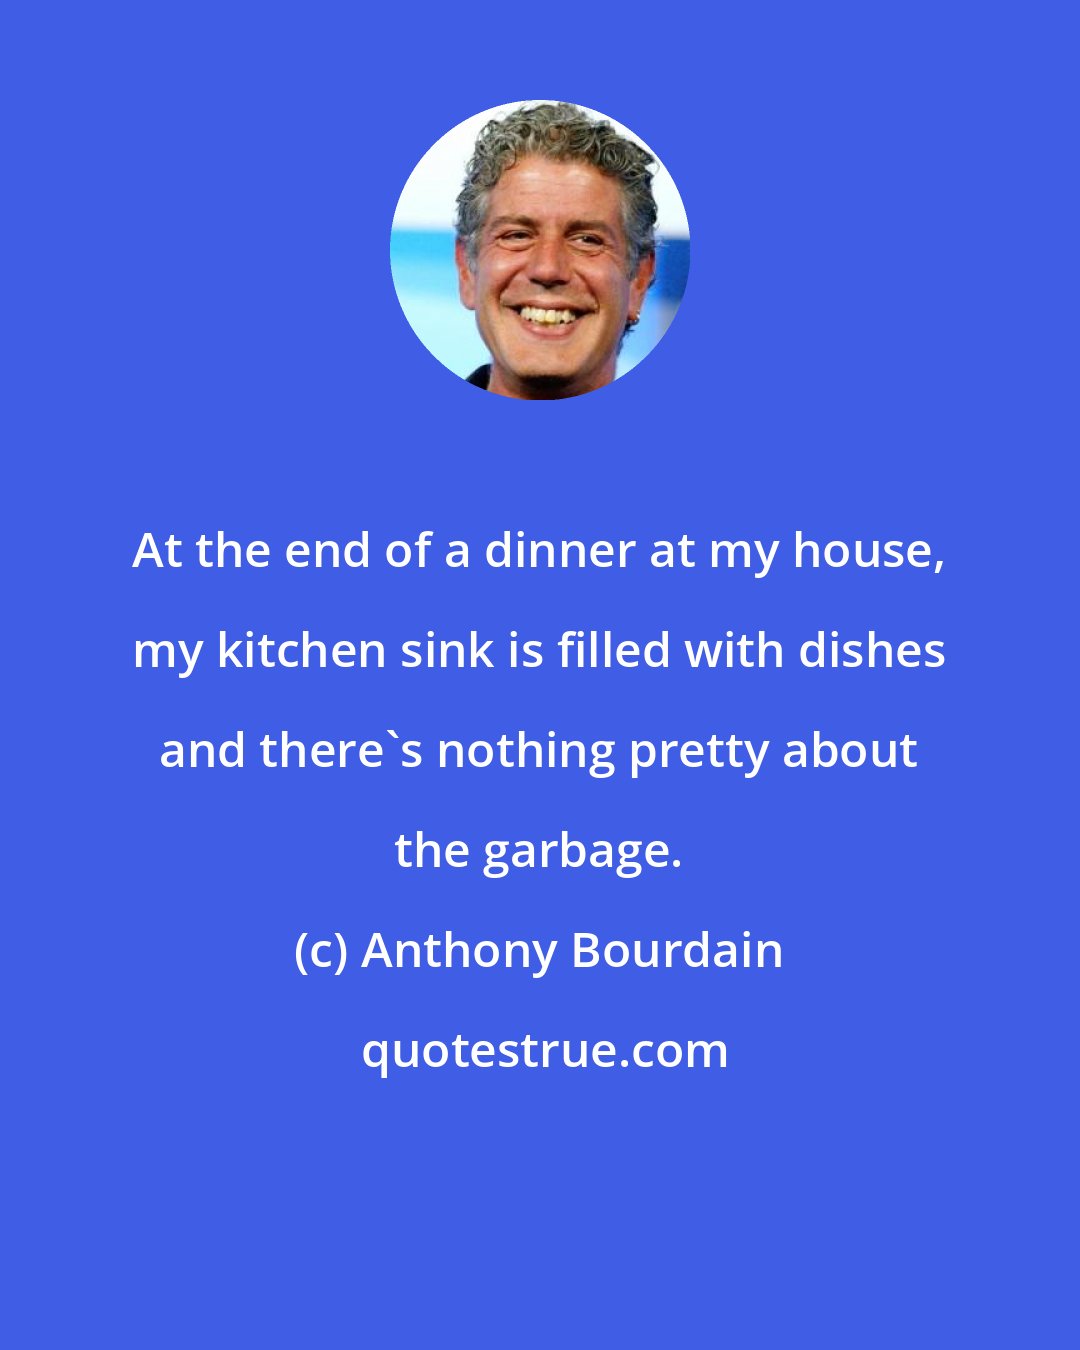 Anthony Bourdain: At the end of a dinner at my house, my kitchen sink is filled with dishes and there's nothing pretty about the garbage.